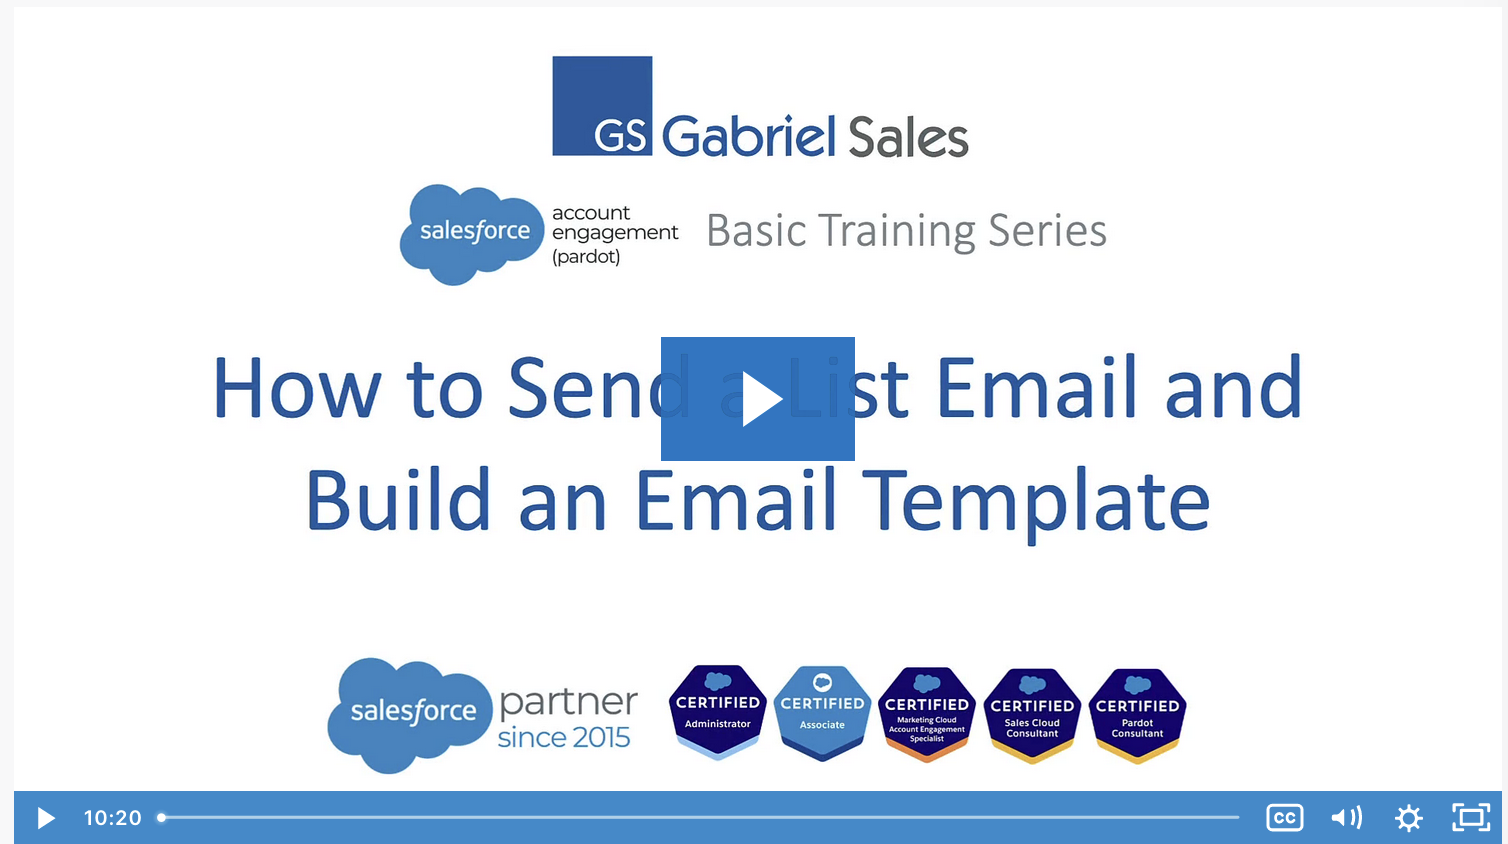 How to Build and Send an Email with Account Engagement Pardot Video